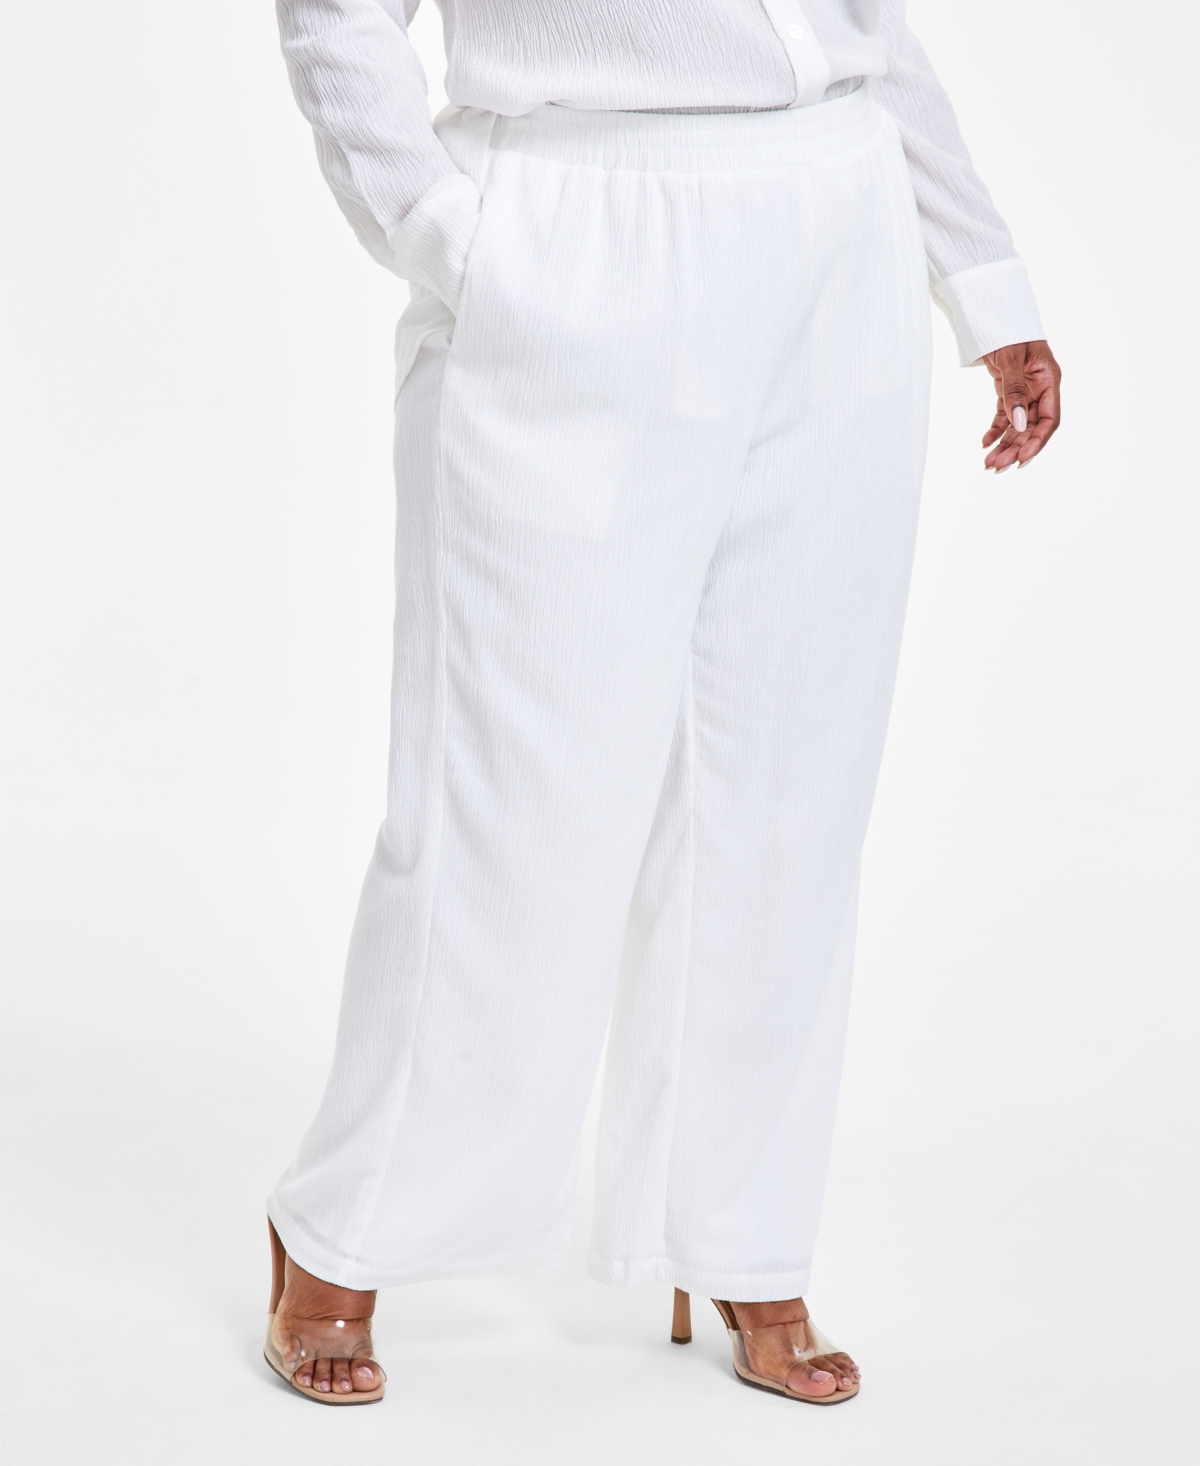 Nina Parker Trendy Plus Size Textured Pull-on Pants In White